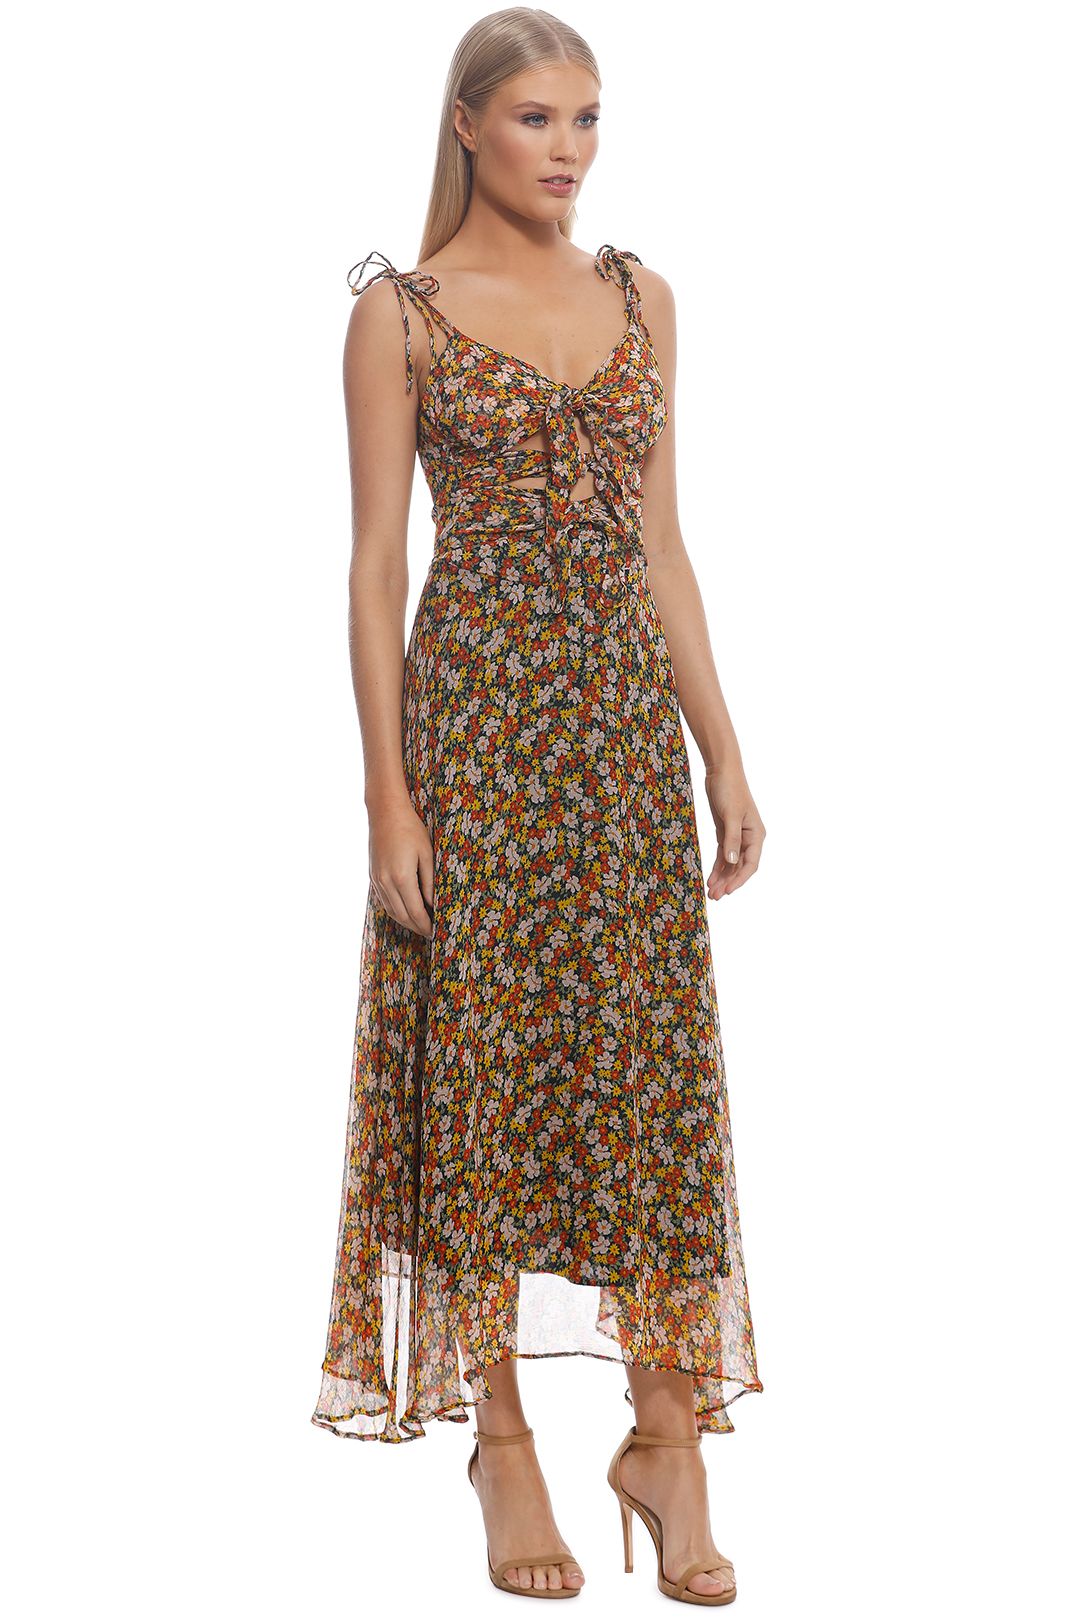 Bec and Bridge - Stevie Tie Dress - Yellow Floral - Side